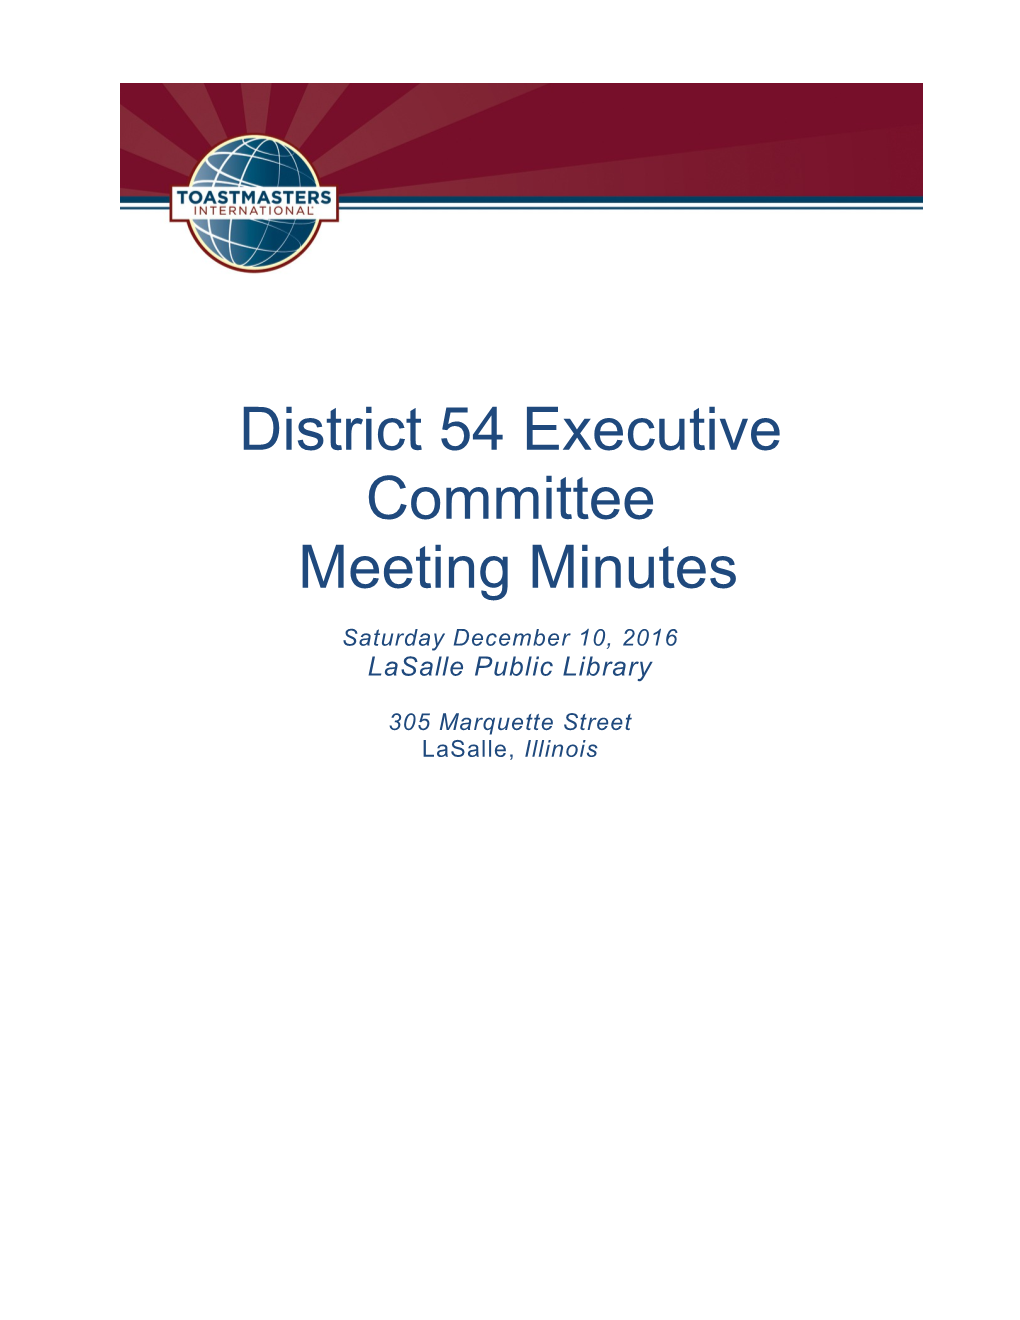 District 54 Executive Committee